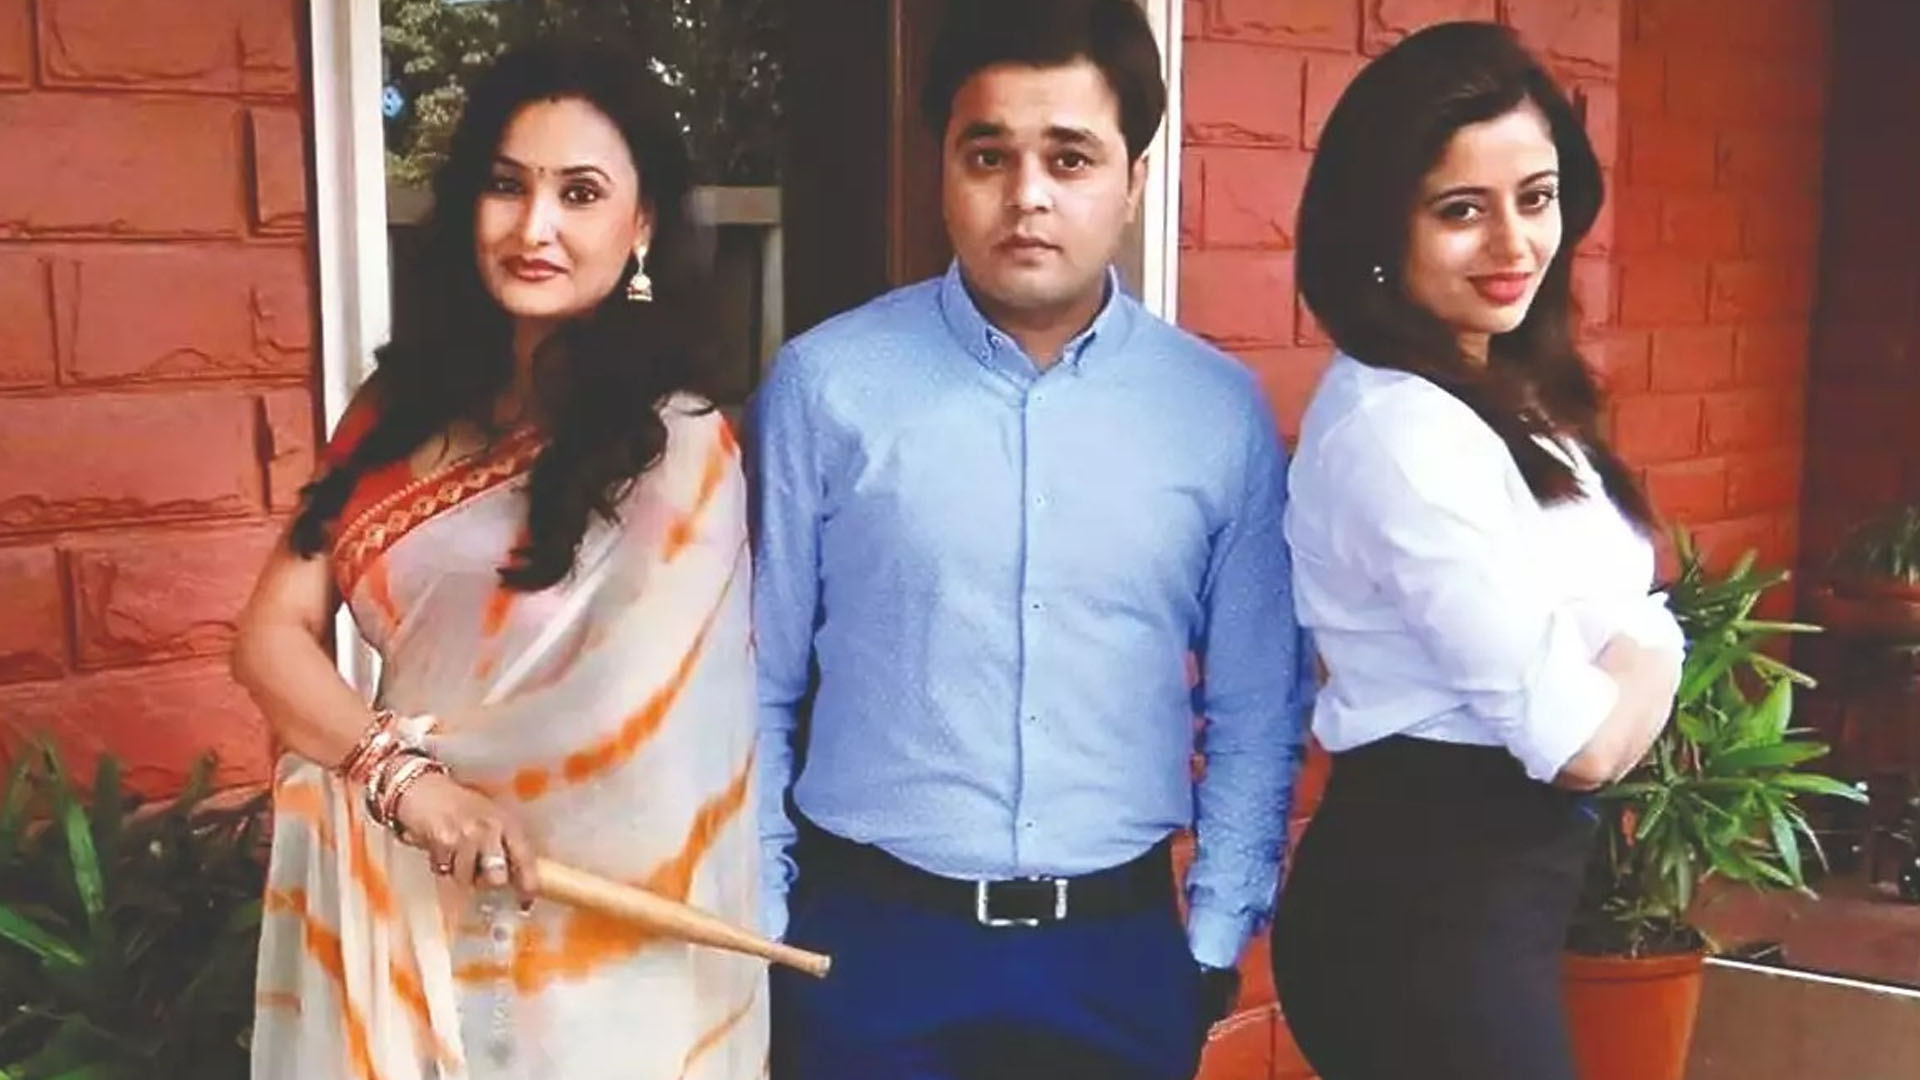 Back on popular demand! Star Bharat is thrilled to announce the return of Season 2 of “May I Come in Madam?” Learn more!